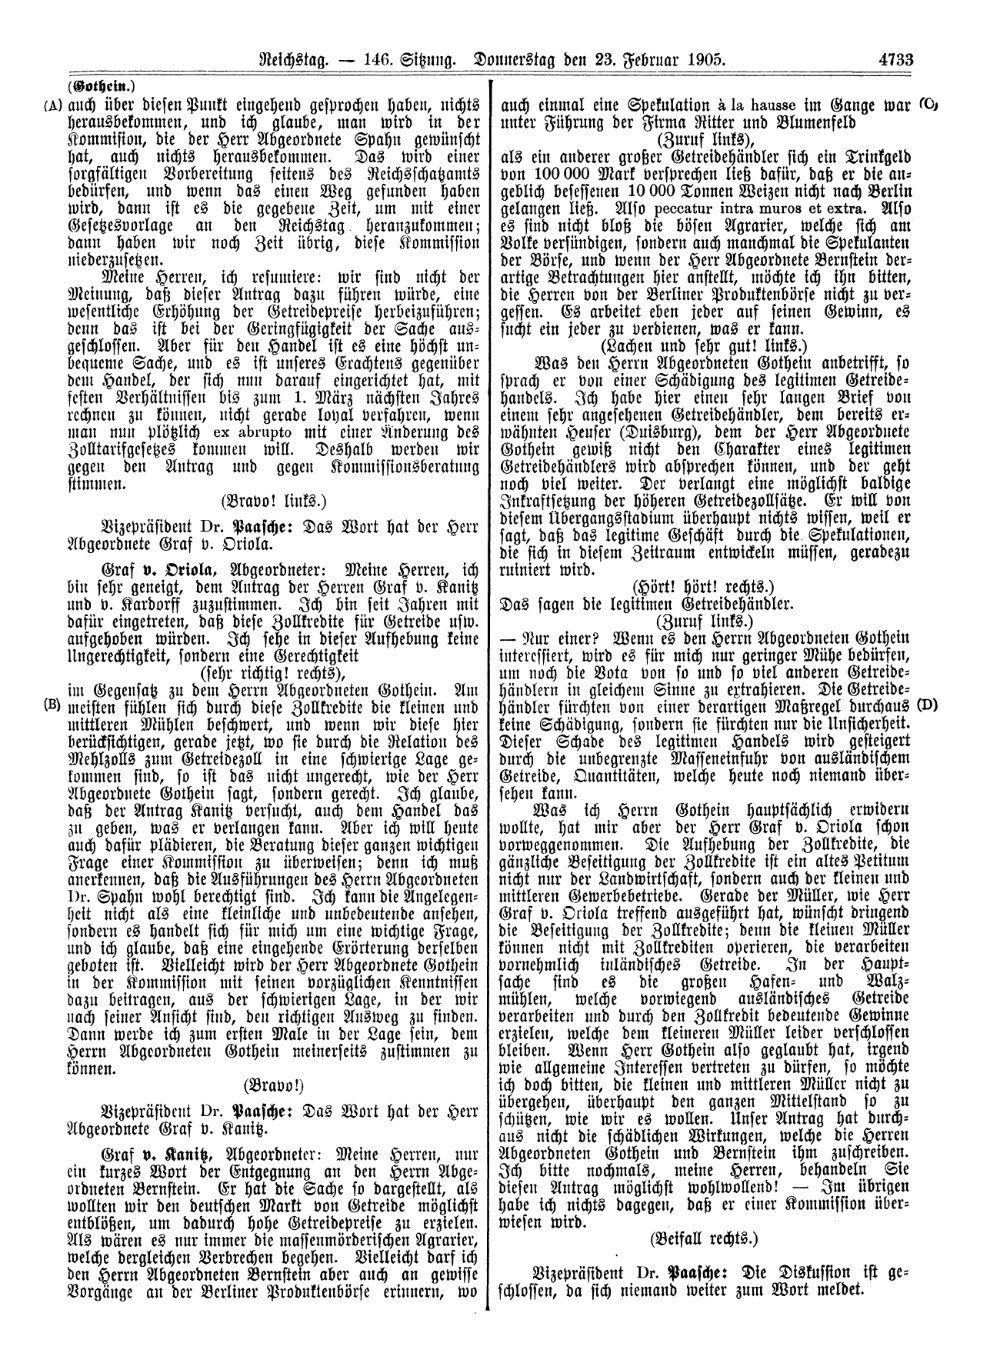 Scan of page 4733